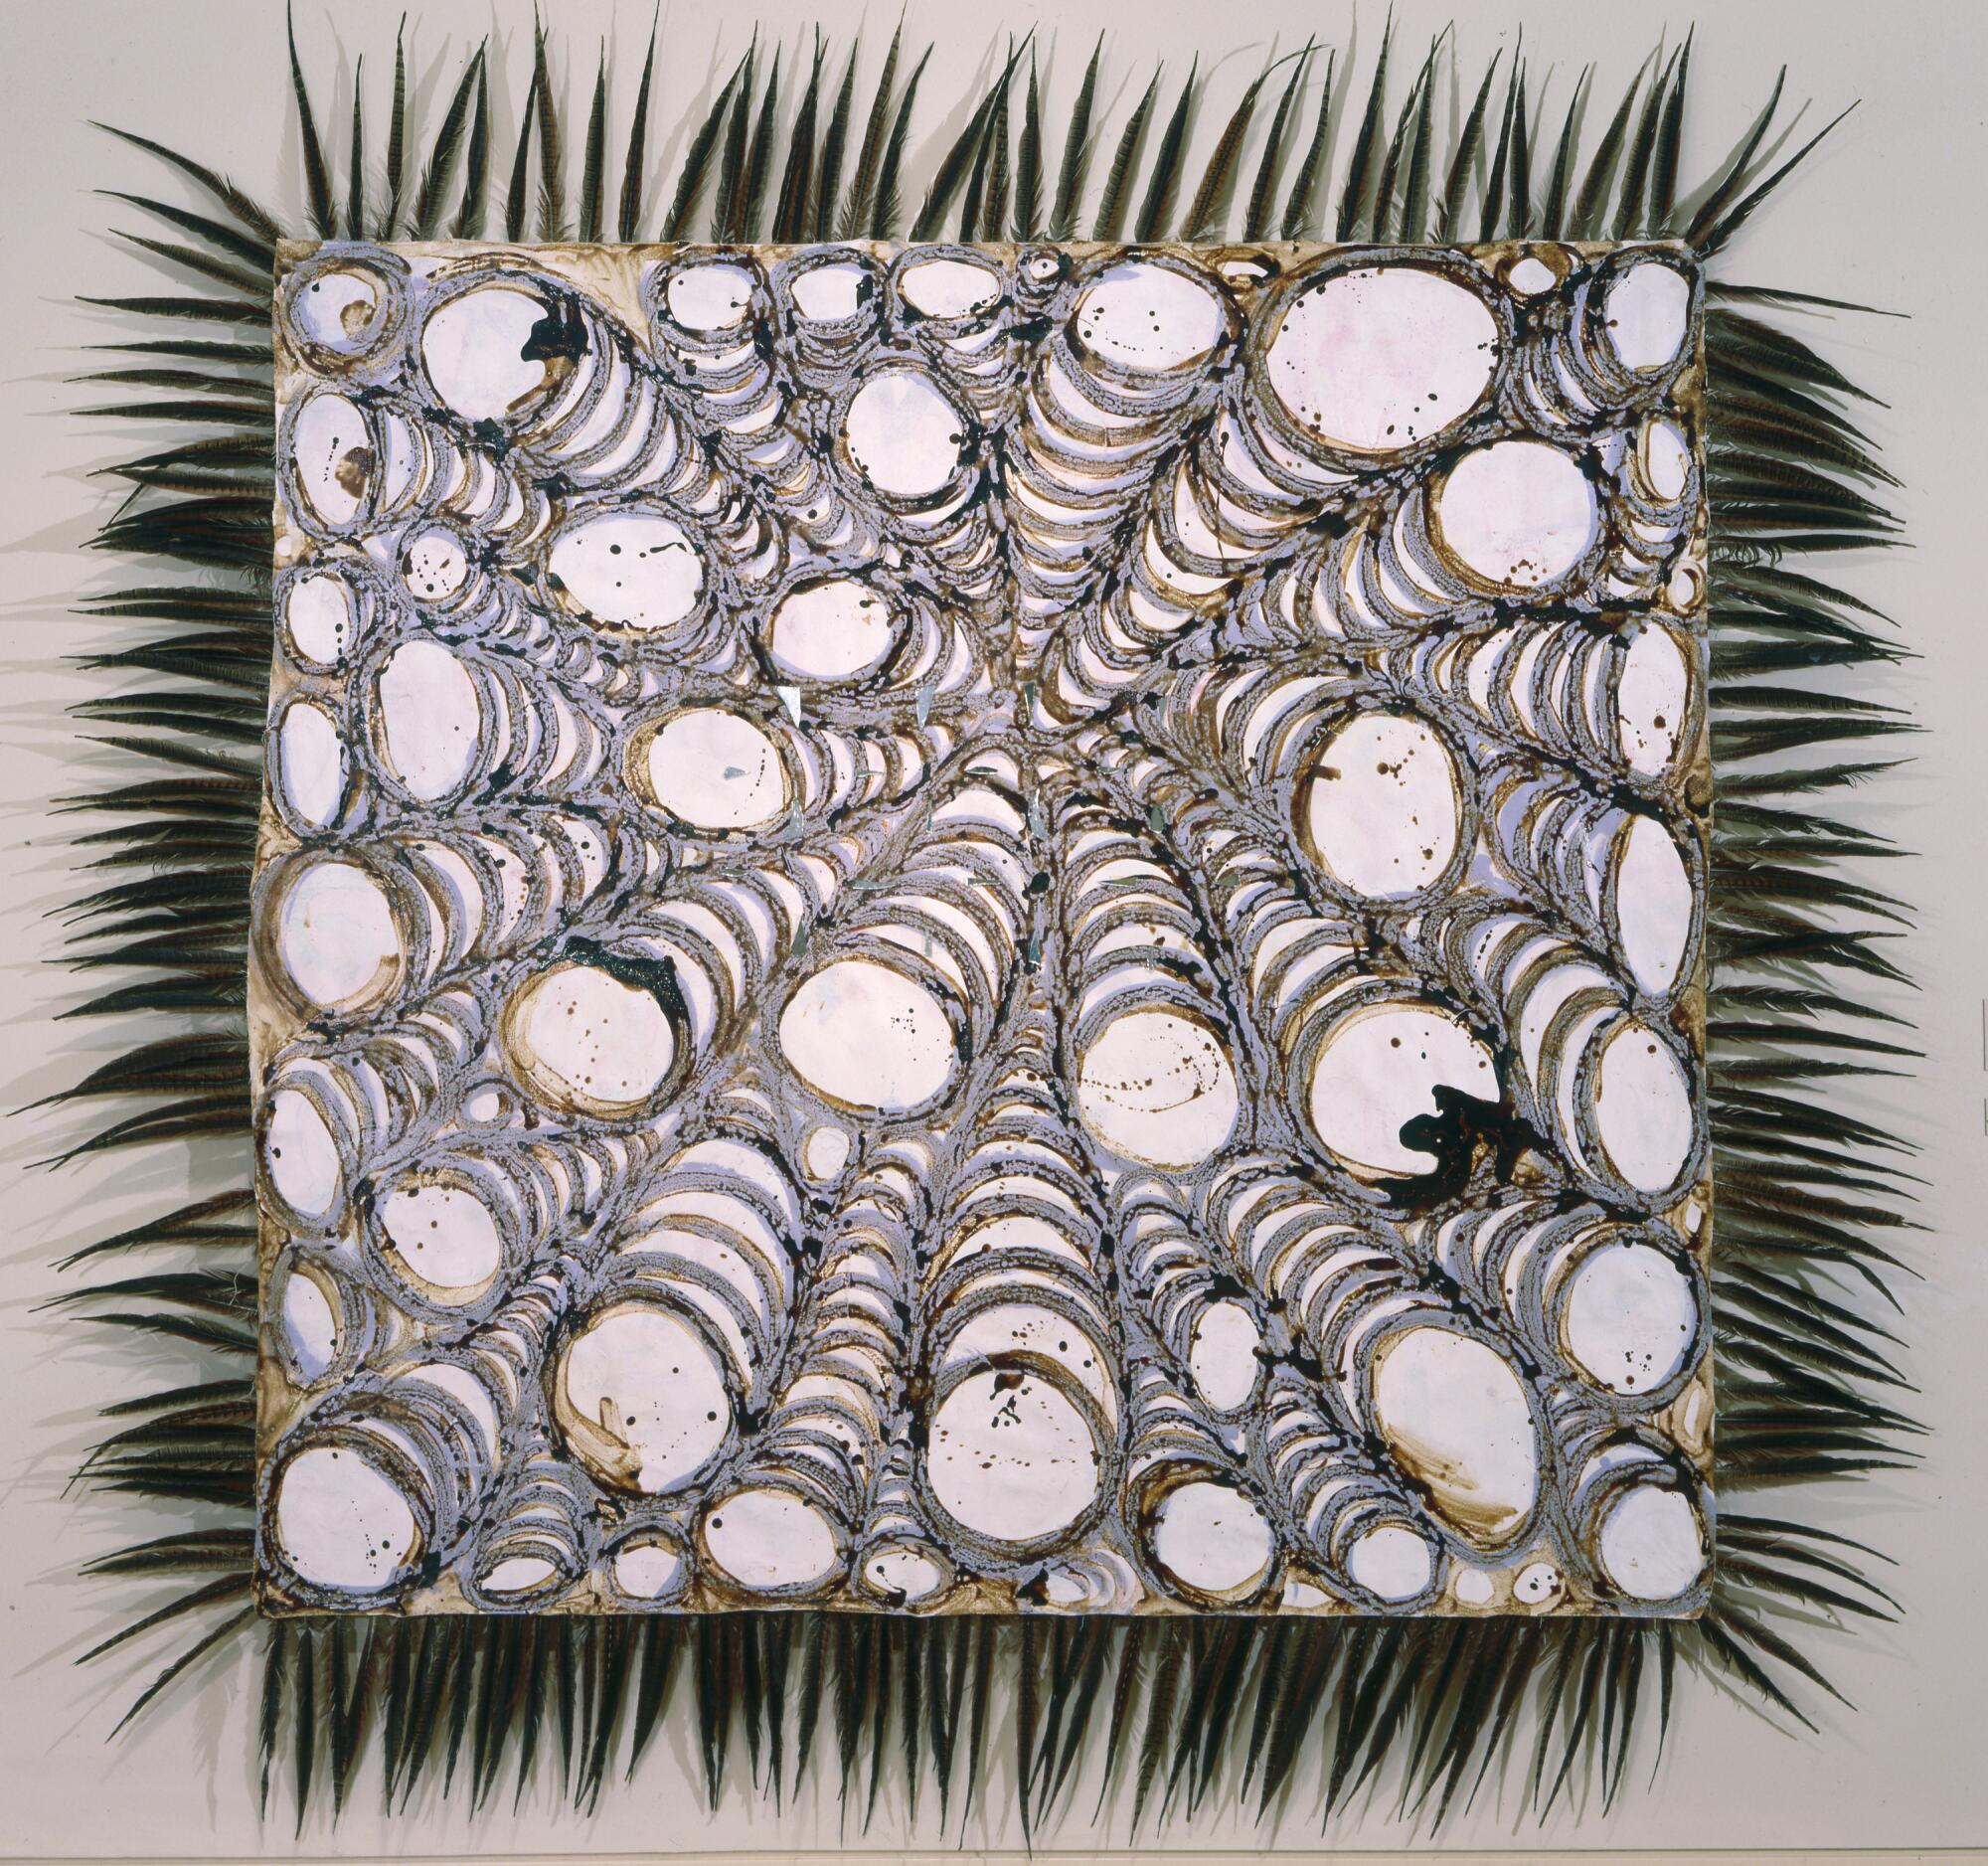 A square canvas by Carls Villa is filled with whorls of circles and is framed in feathers.